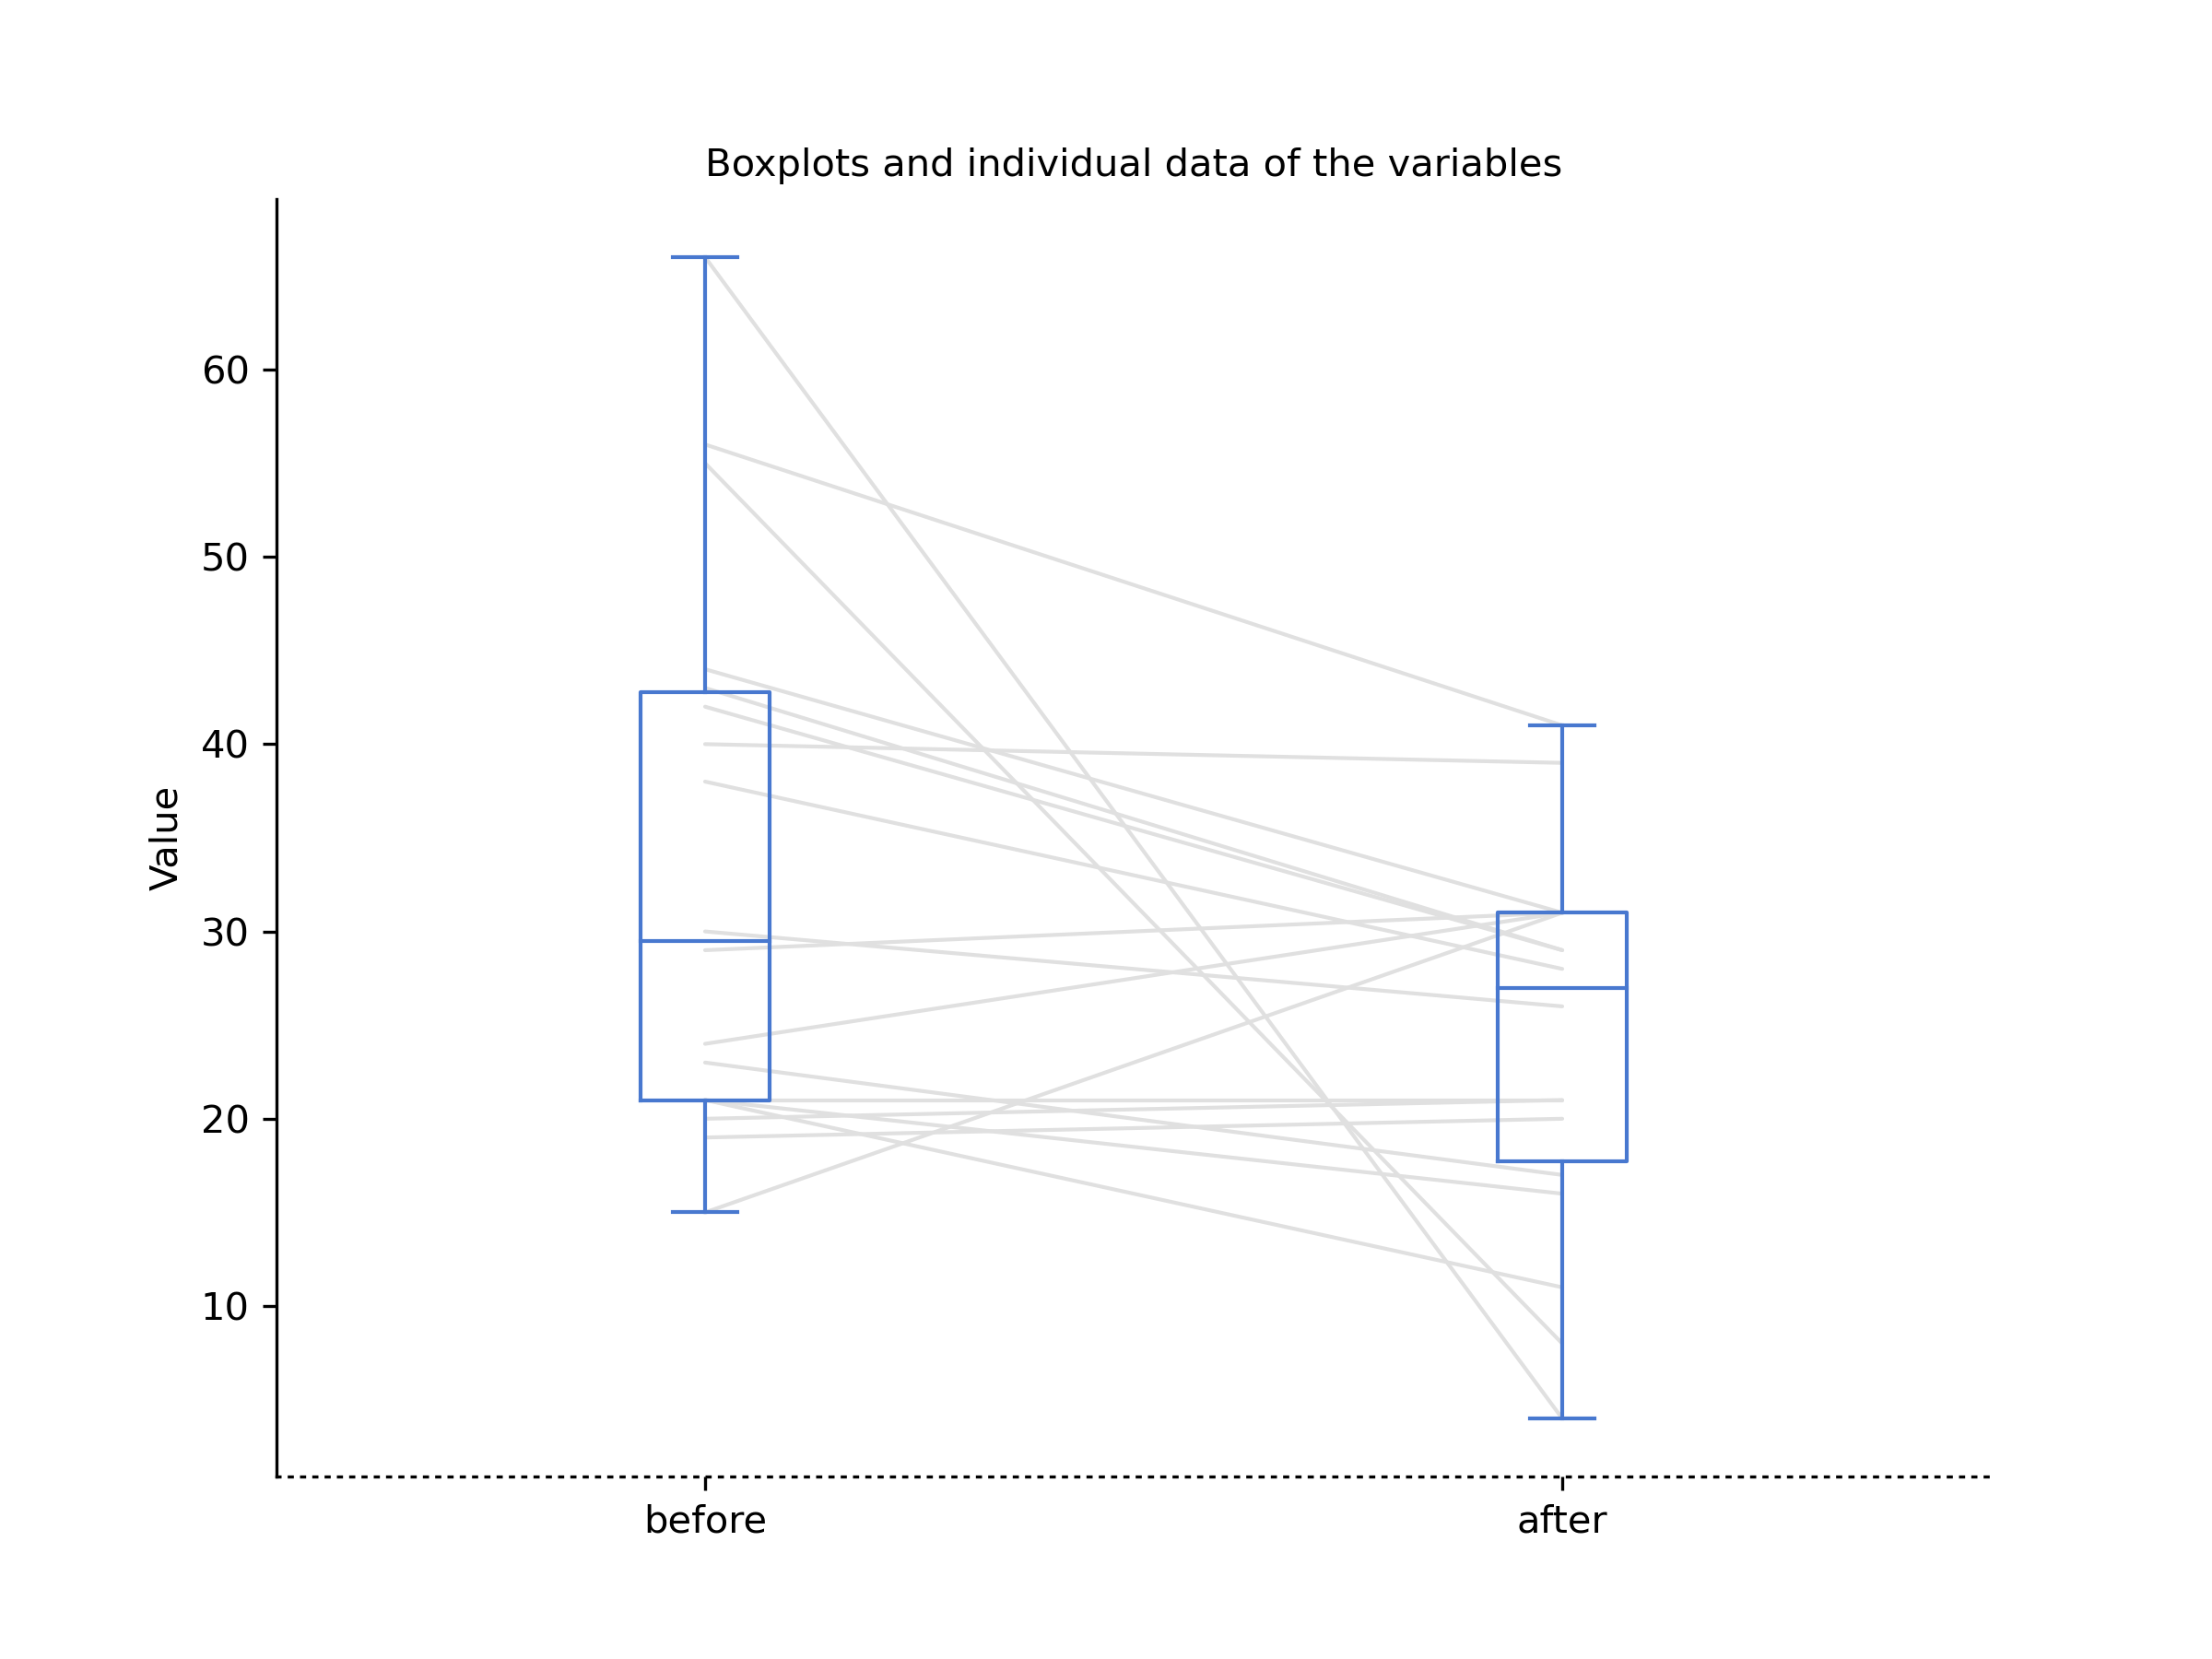 Happiness before and after statistics class (`Compare repeat measures variables` function used).